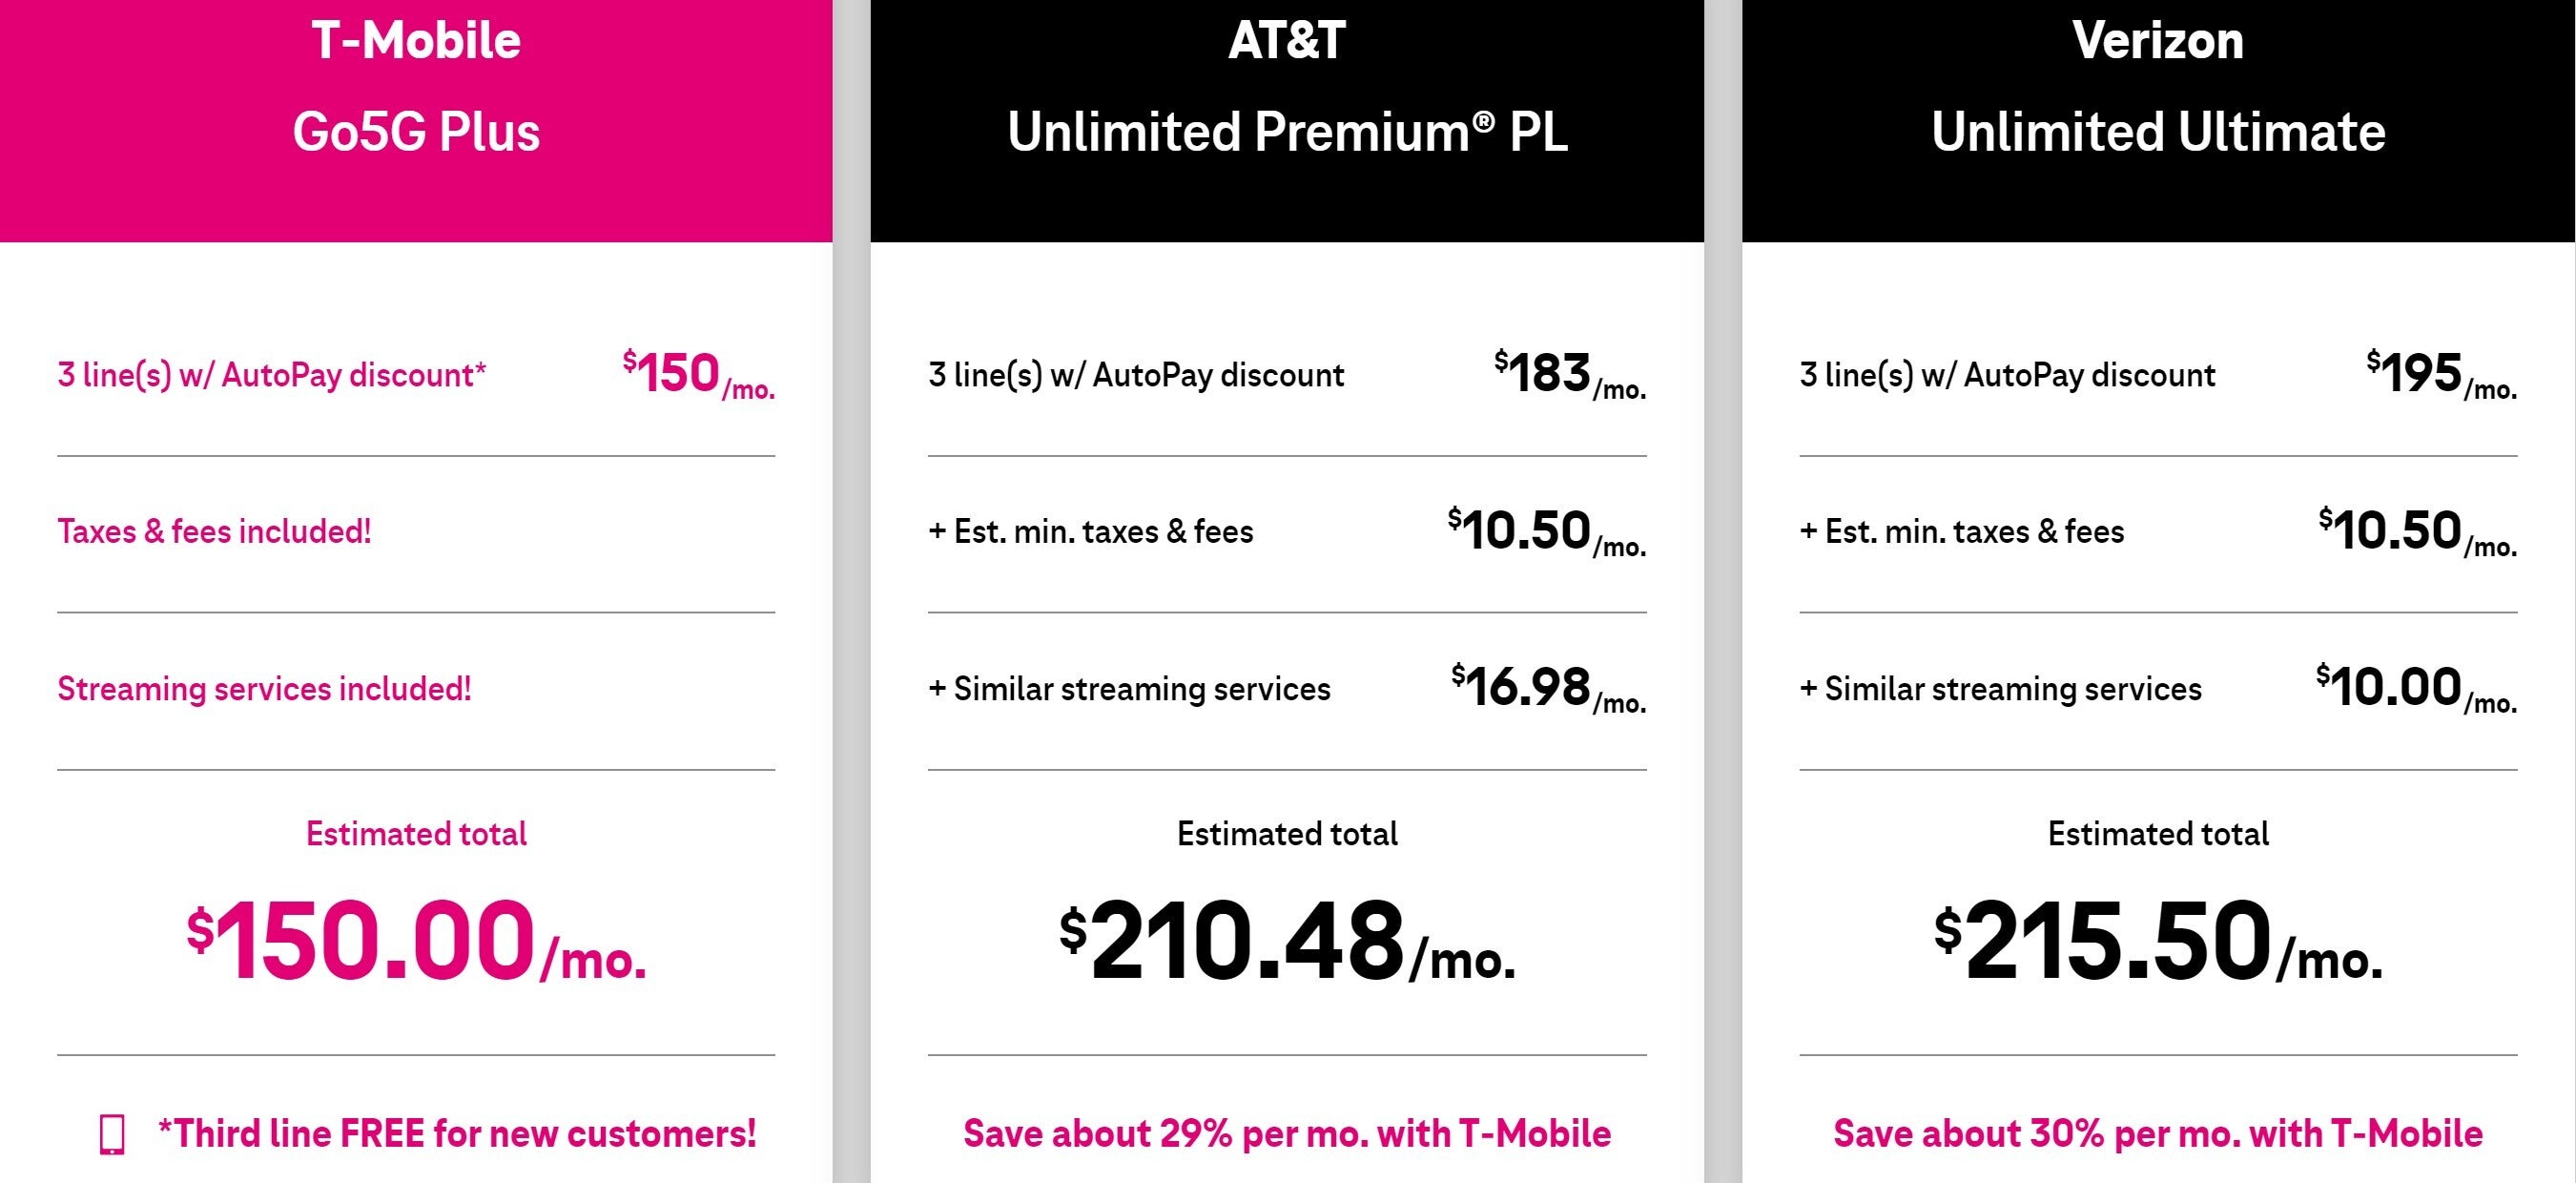 T-Mobile vs AT&amp;amp;T vs Verizon plan prices - Is T-Mobile still the underdog after the plan price increases?